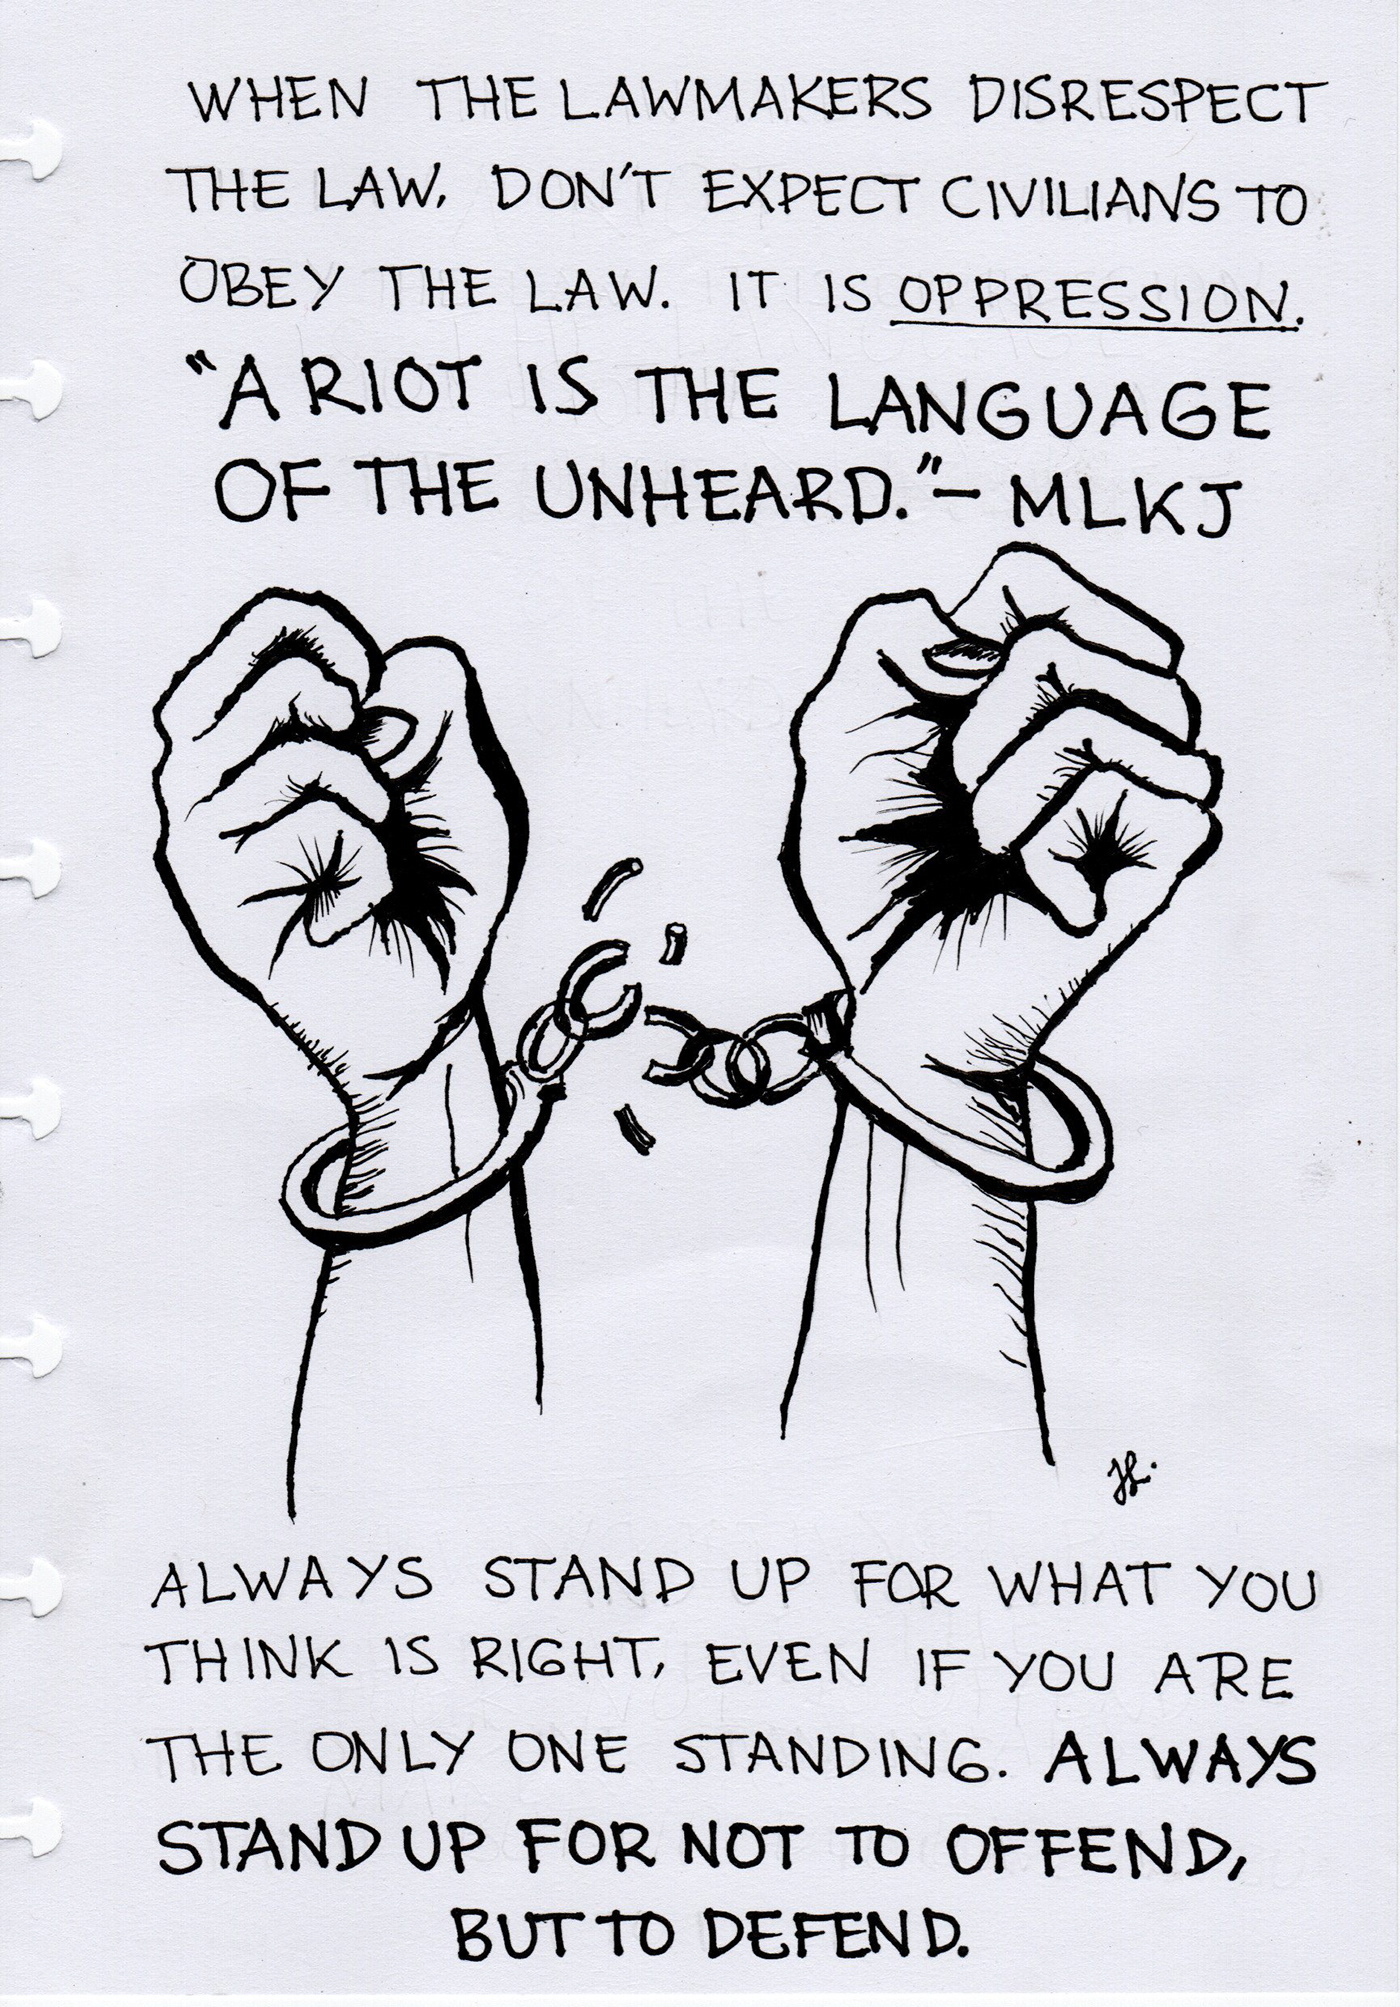 text ILLUSTRATION  Drawing  handcuffs chains rebel protest injustice Justice law